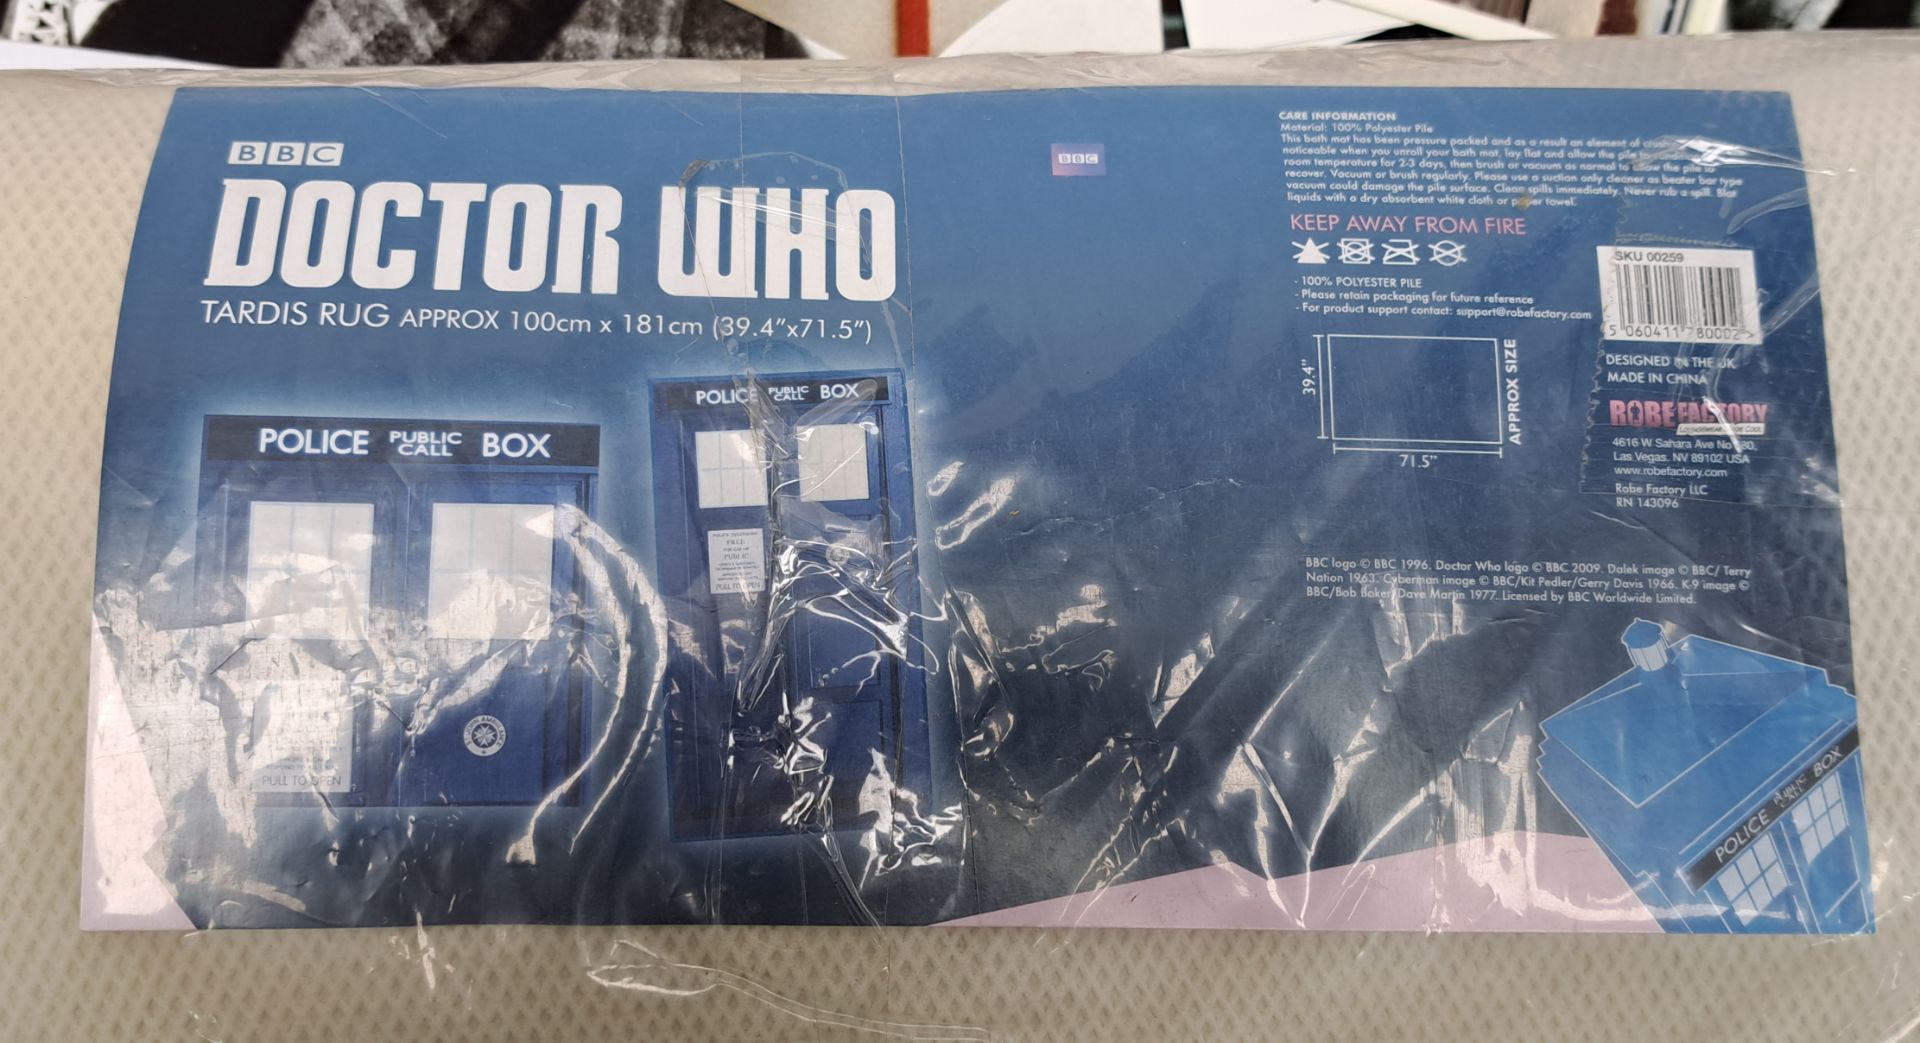 Robe Factory Doctor Who TARDIS rug & a large quantity of pre-printed signed Doctor Who photos & p... - Image 2 of 2